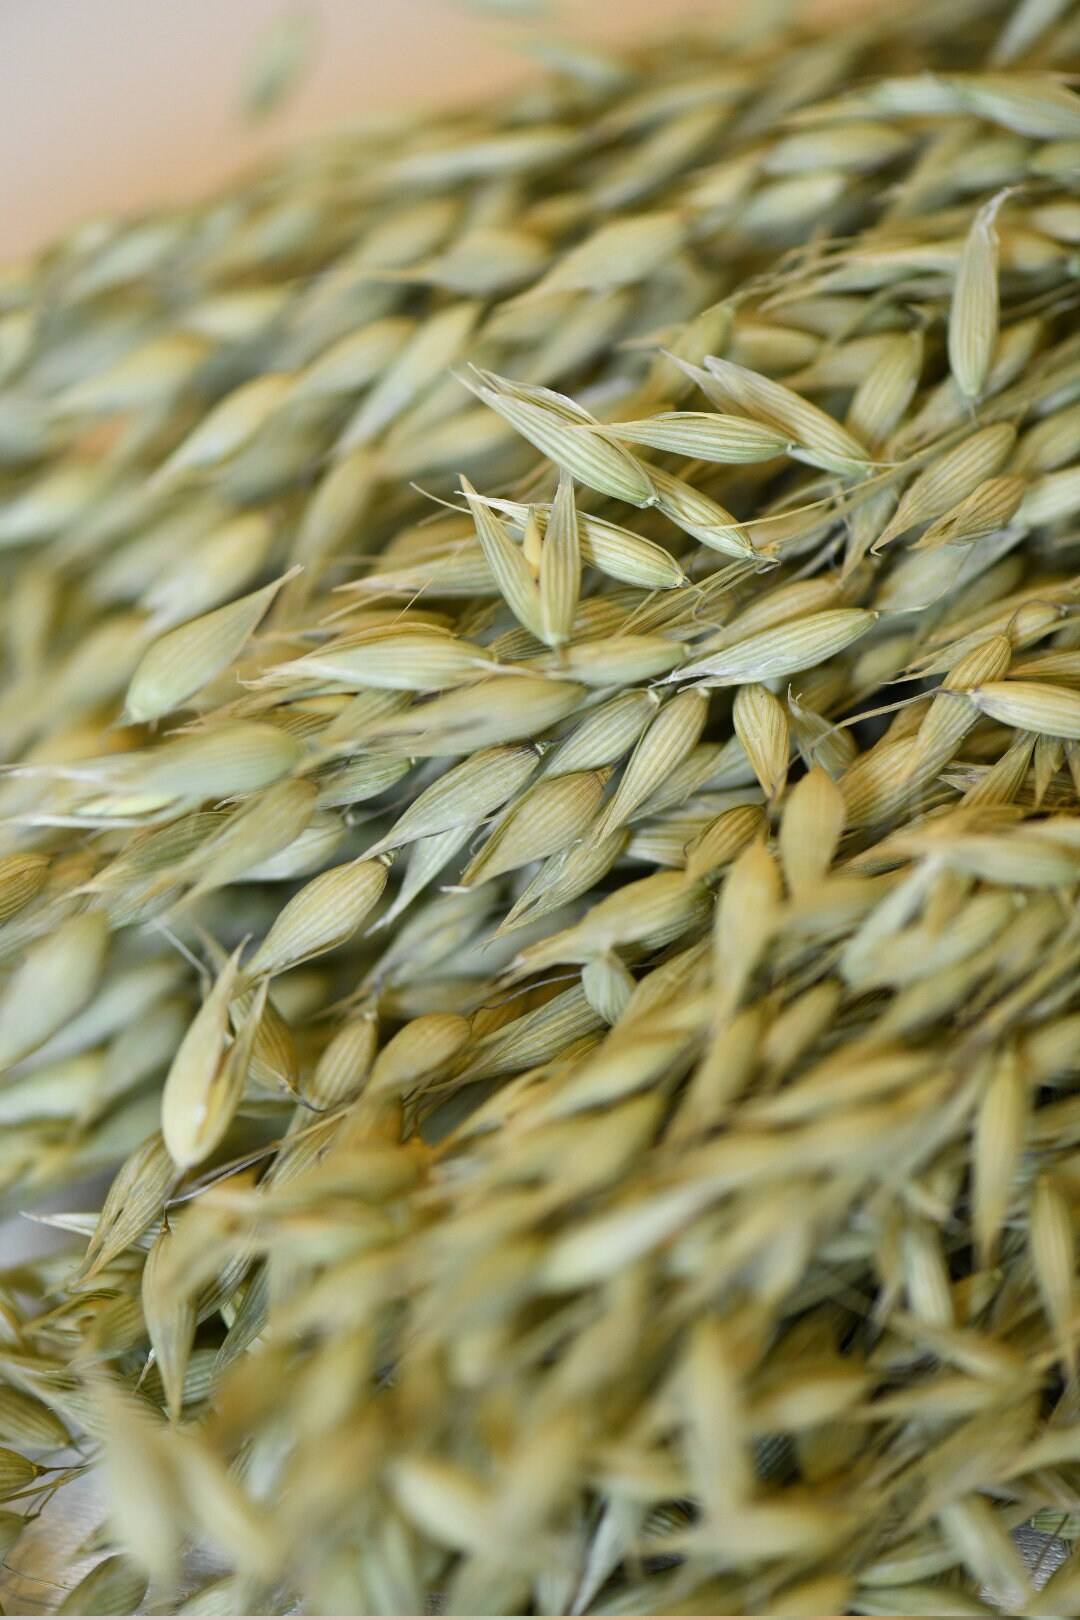 Dried Avena Oats, Green Grains, Dried Oats, Wedding Preserved Bouquets, Bunches, Natural Flax, Golden Pods, Flowers, Wheats and Grass